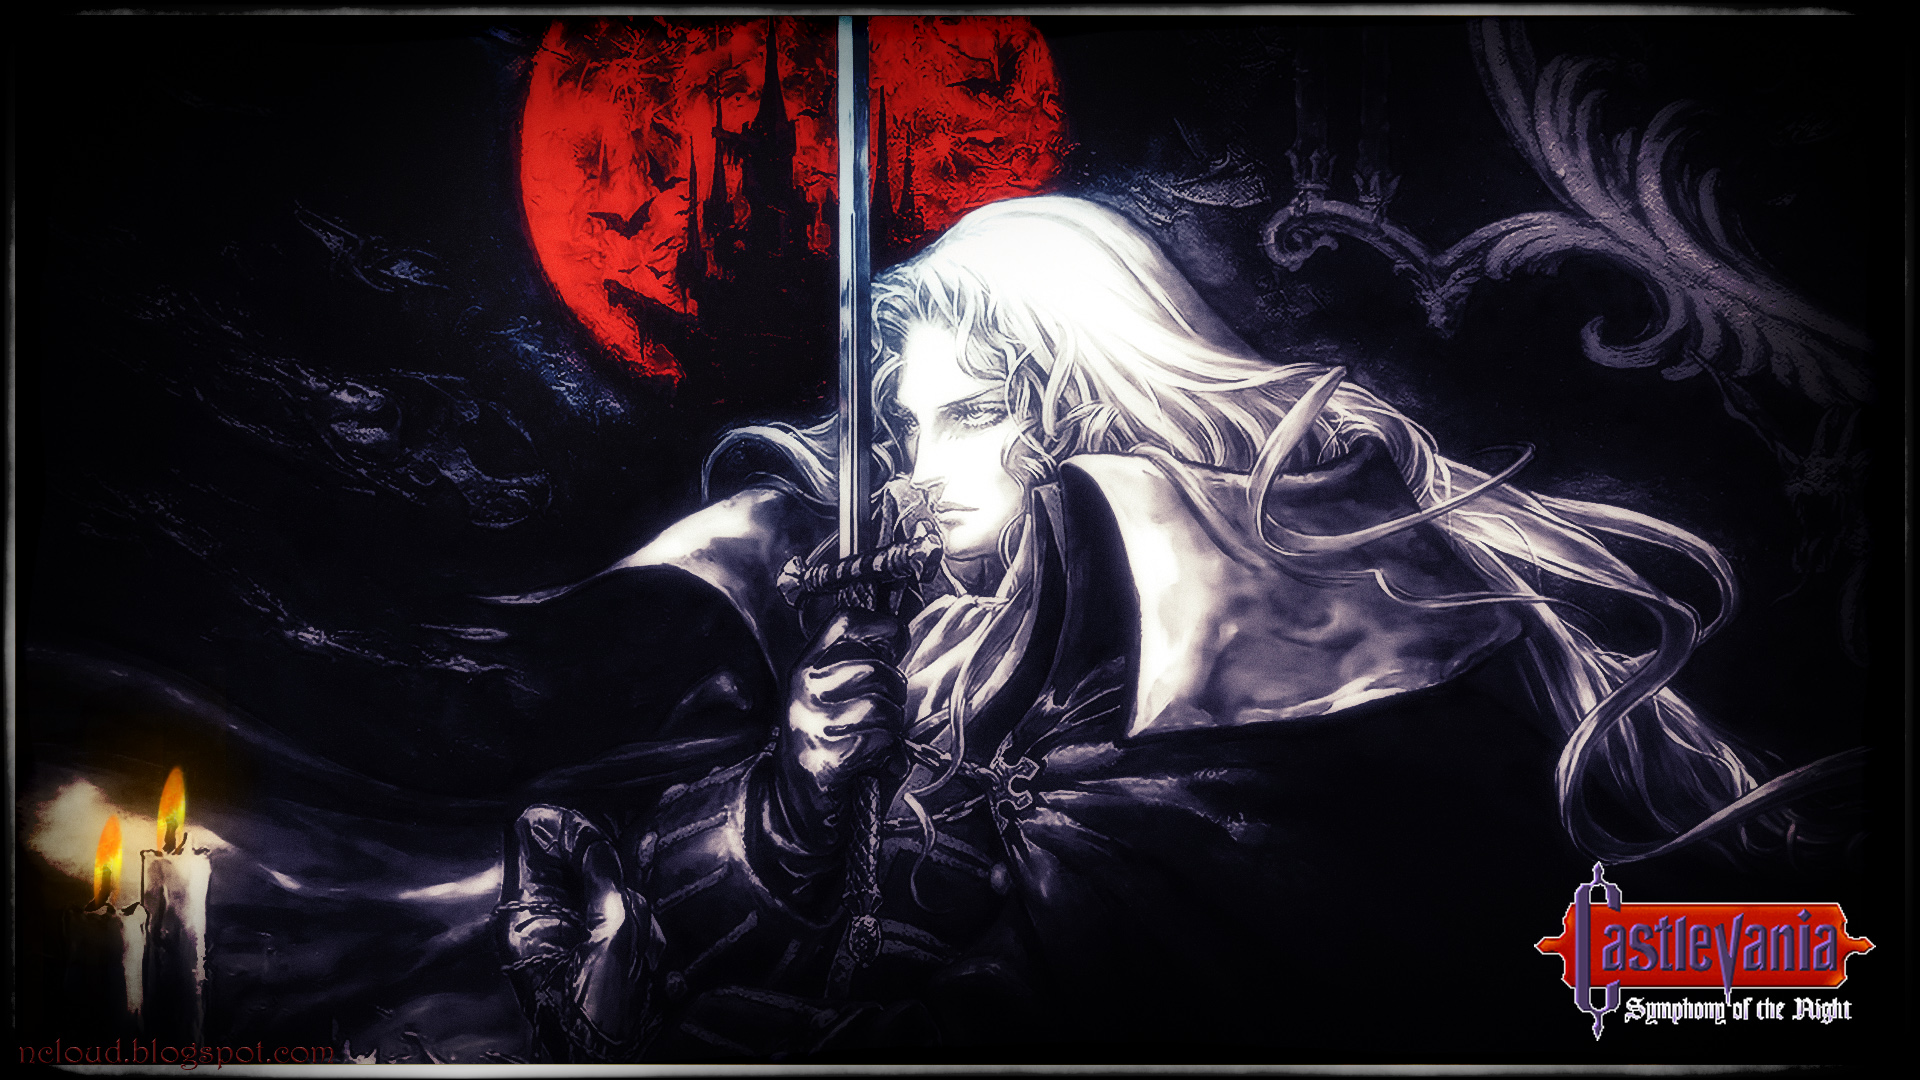 Movies Music Anime My Castlevania Symphony Of The Night HD Wallpaper